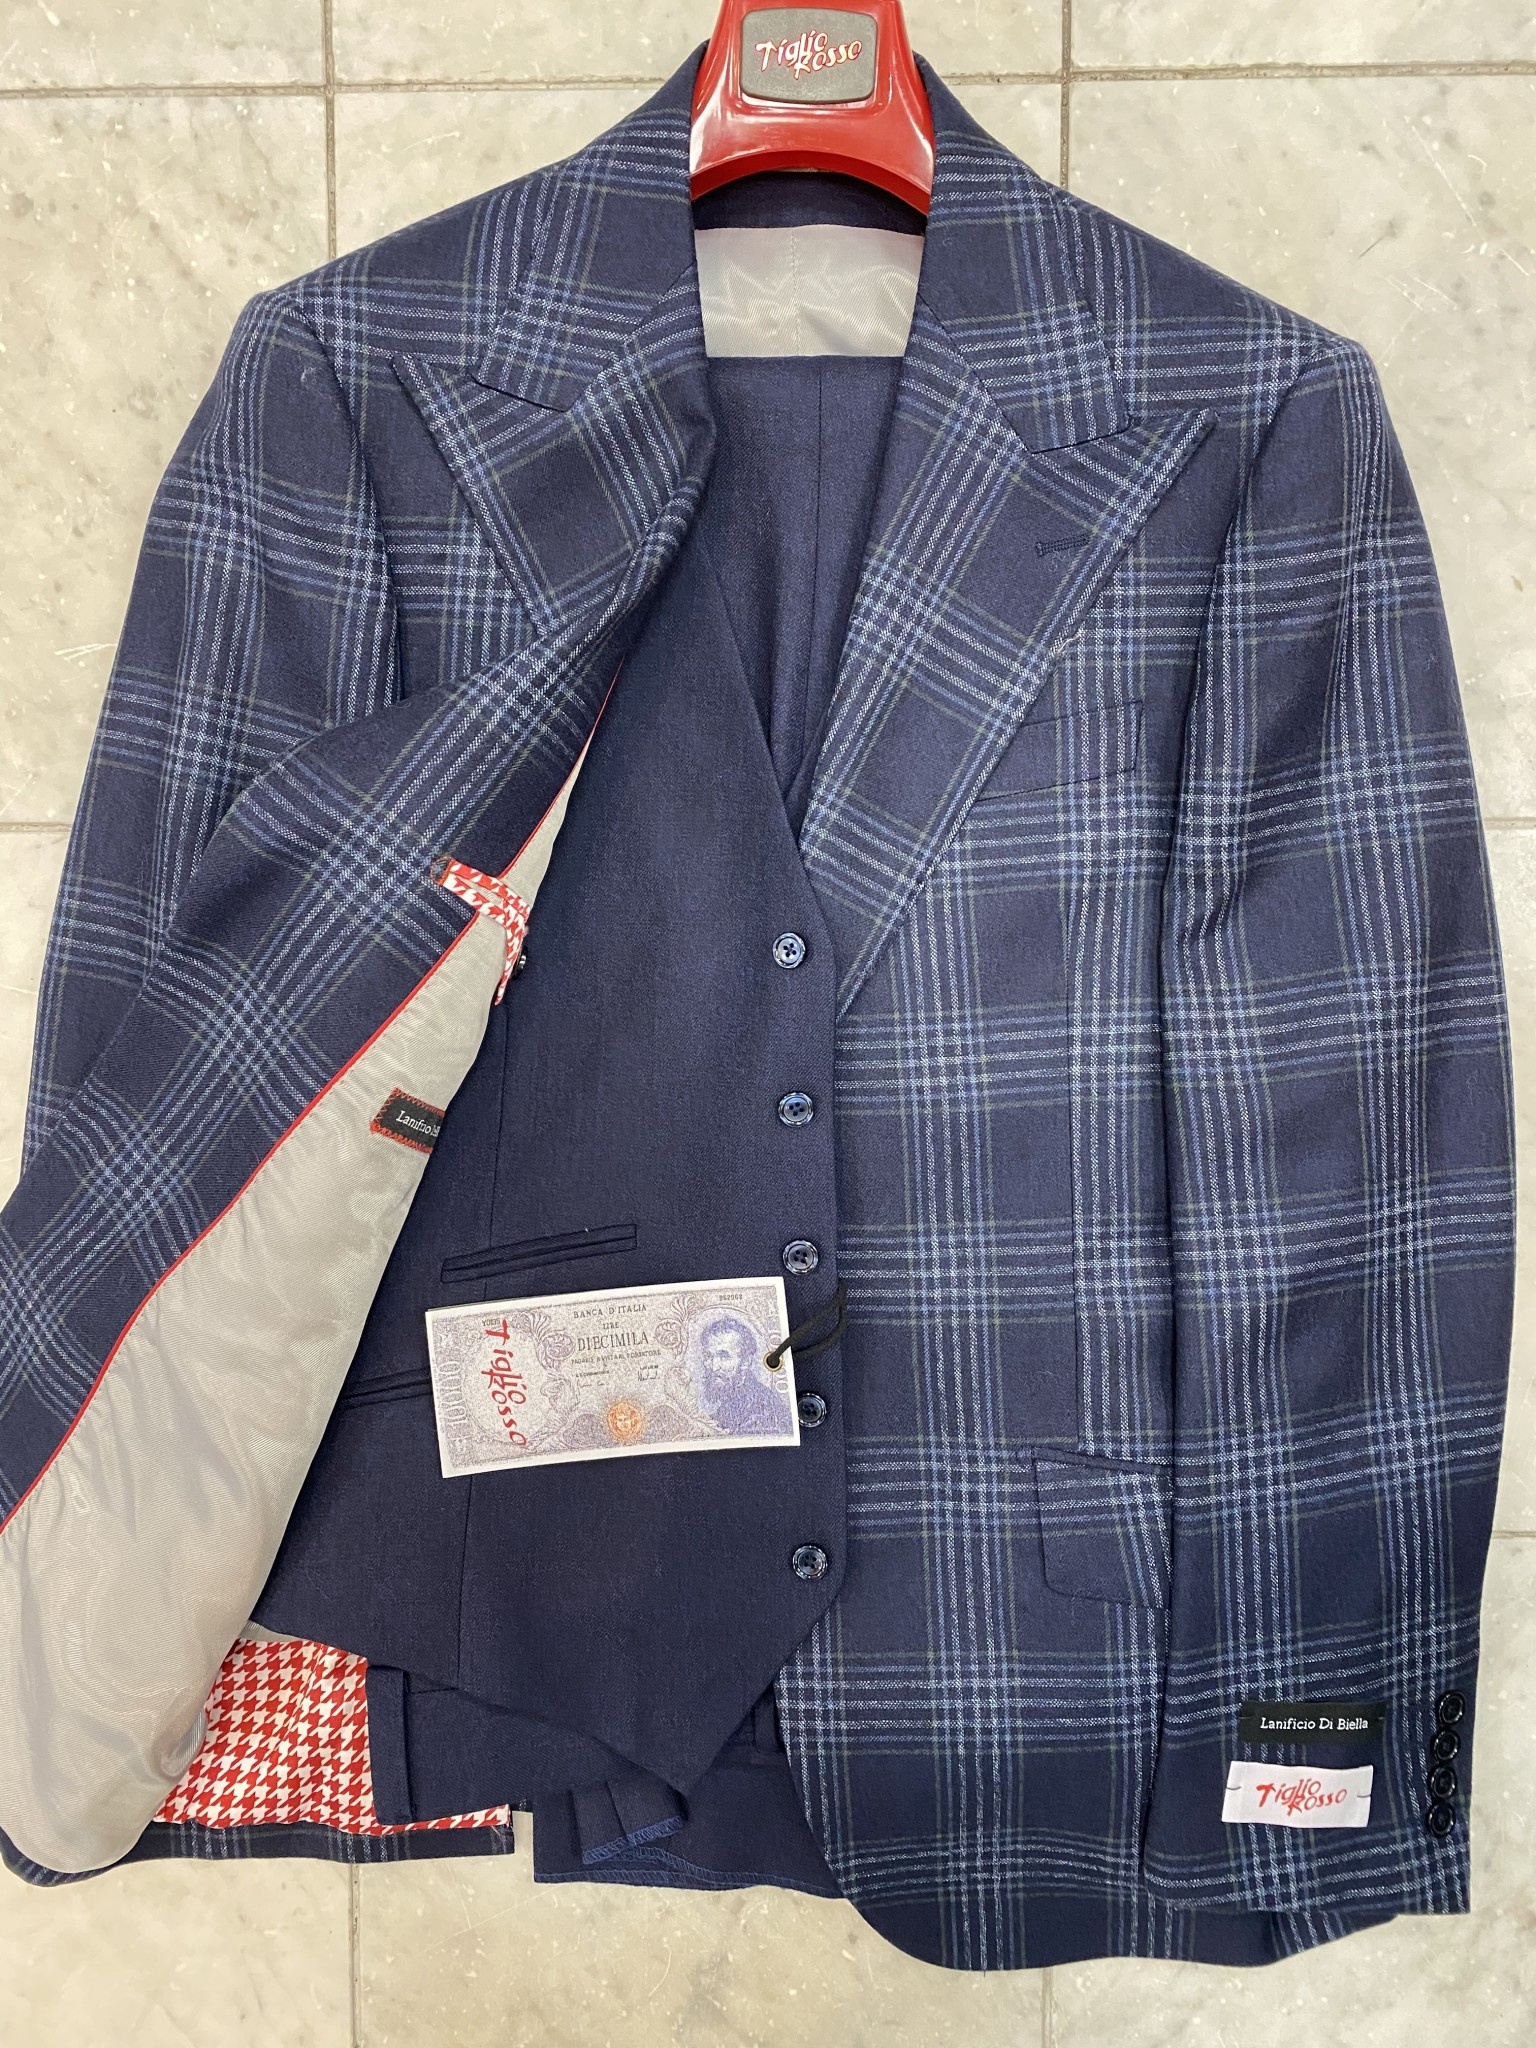 Tiglio Wool Vested Plaid Compose Suit - The City Warehouse